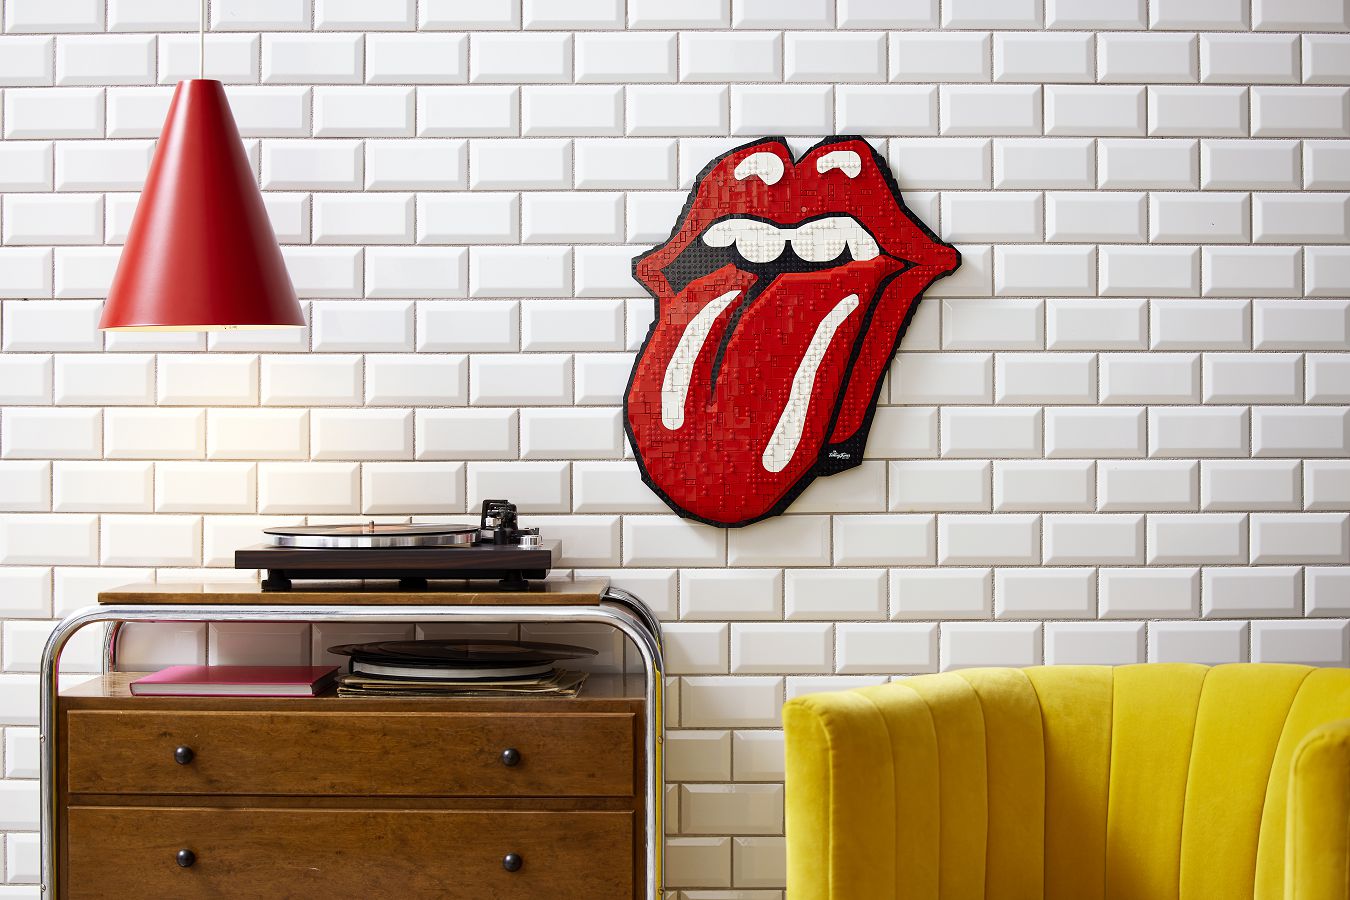 LEGO: launched the new set dedicated to The Rolling Stones!